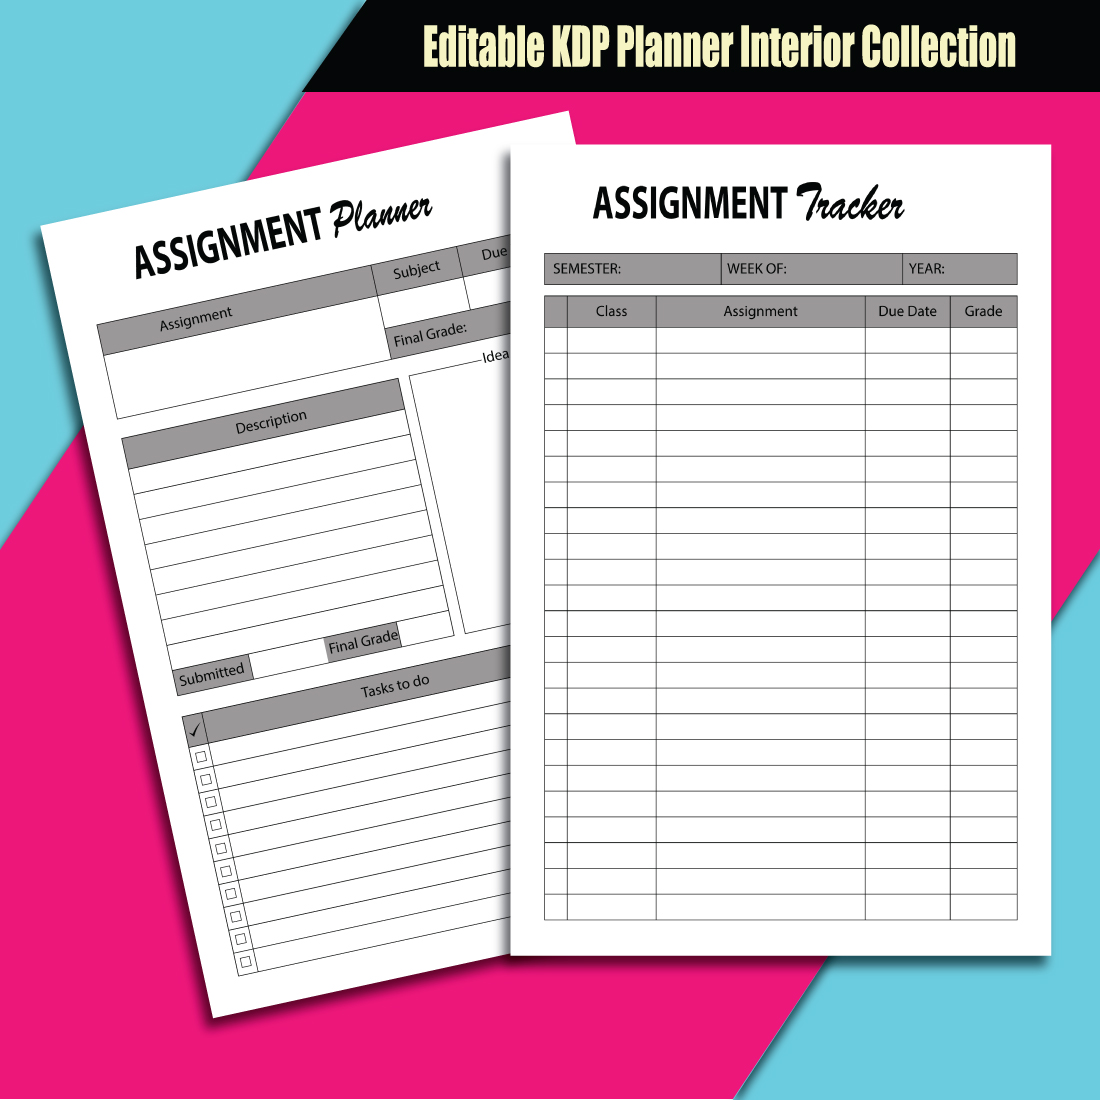 Editable KDP Planner Interior Collection preview image.